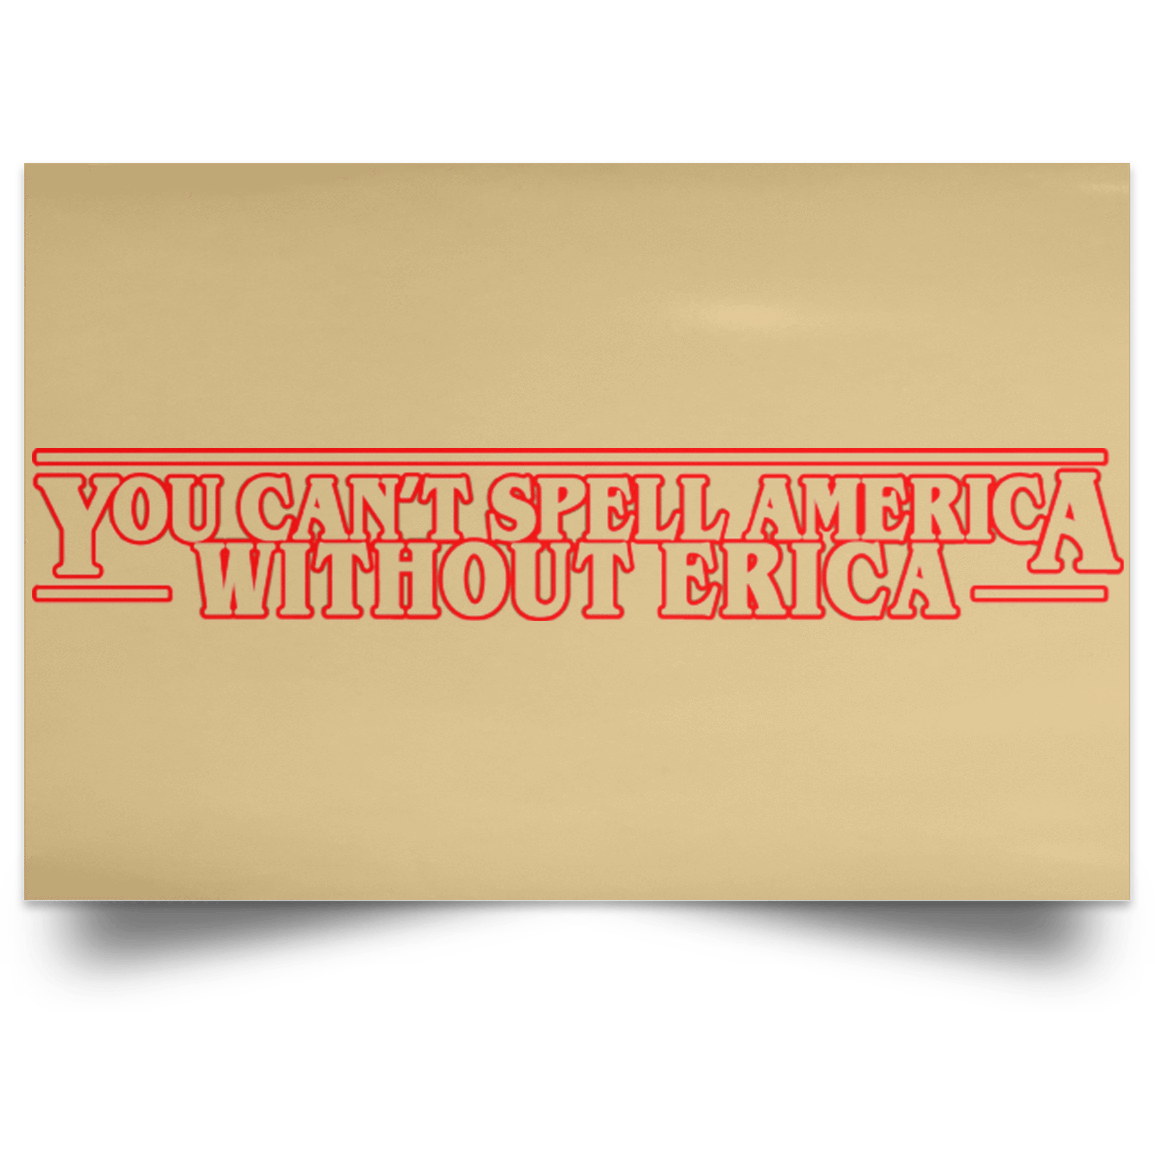 Housewares Tan / 18" x 12" You Cant Spell America Without Erica Landscape Poster